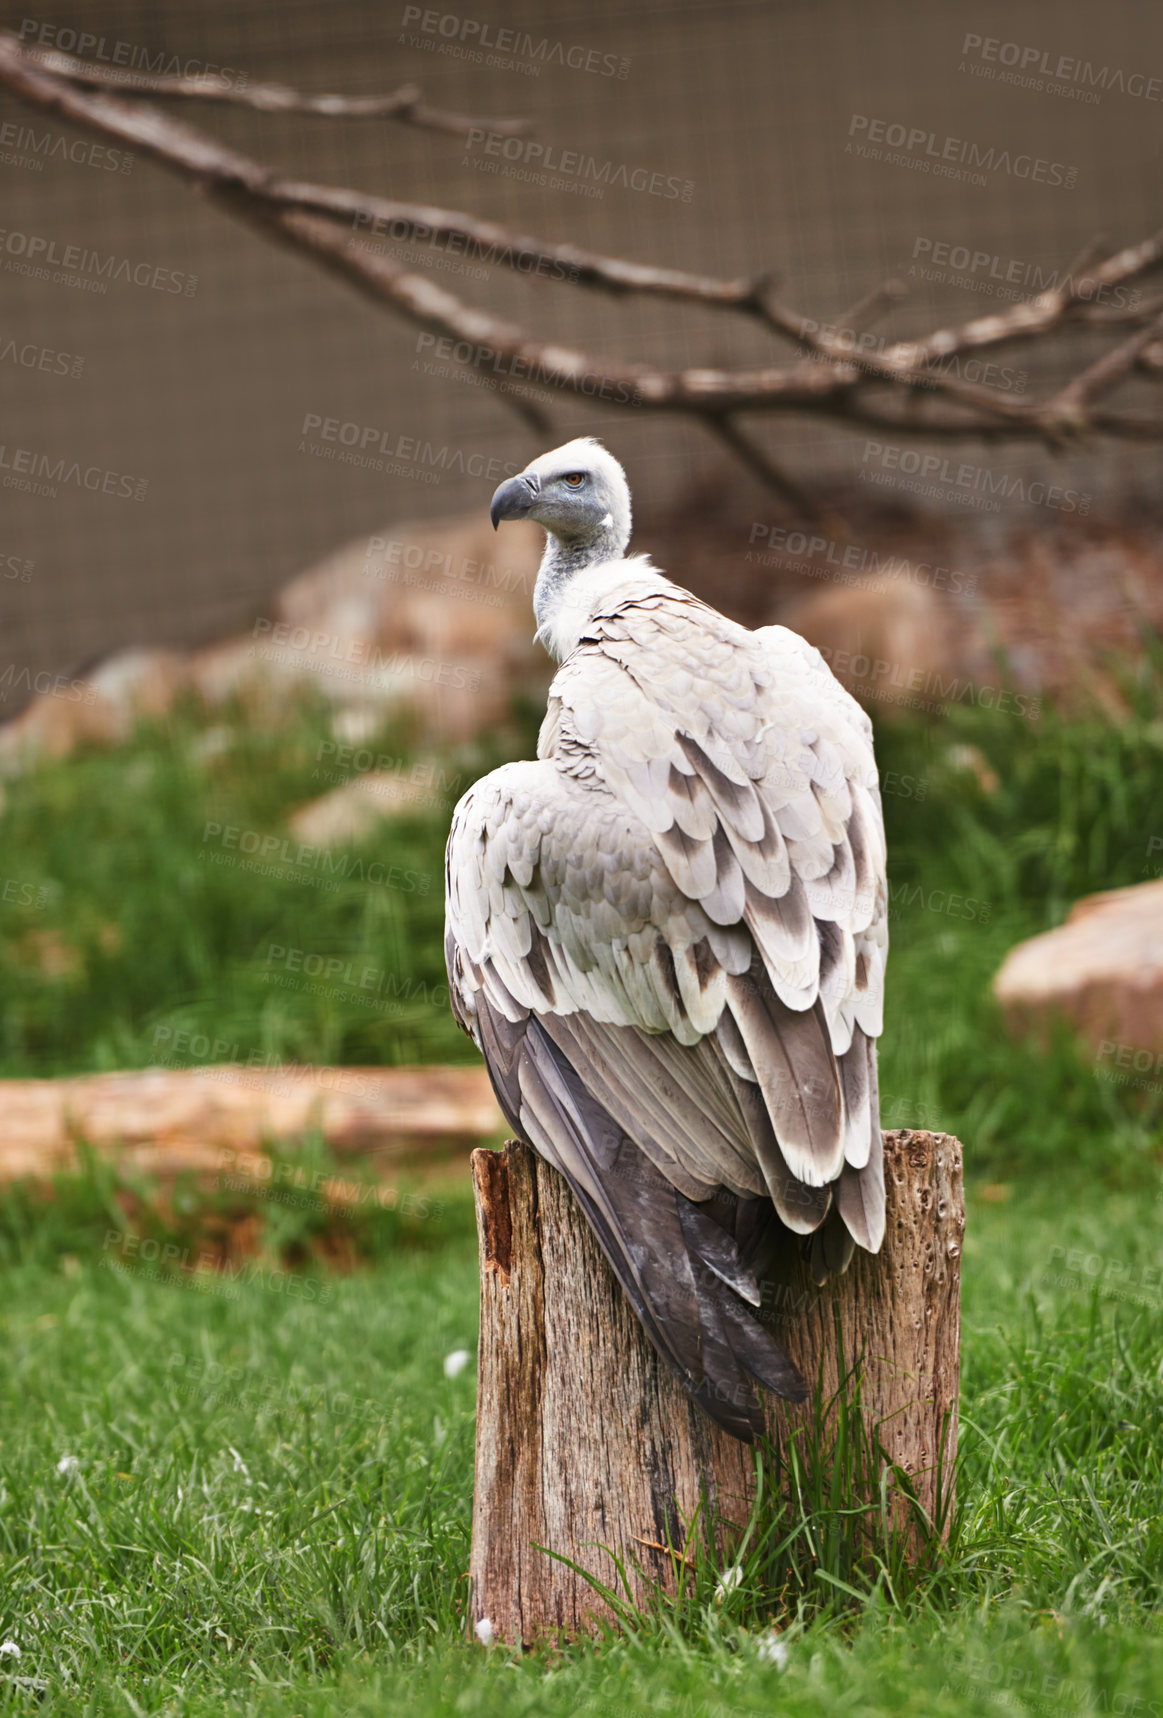 Buy stock photo Vulture or bird, stump and sit outdoor in nature with feathers, landscape or farm to hunt. Wildlife, carnivore animal or birds of prey in zoo environment with wooden and grass in countryside